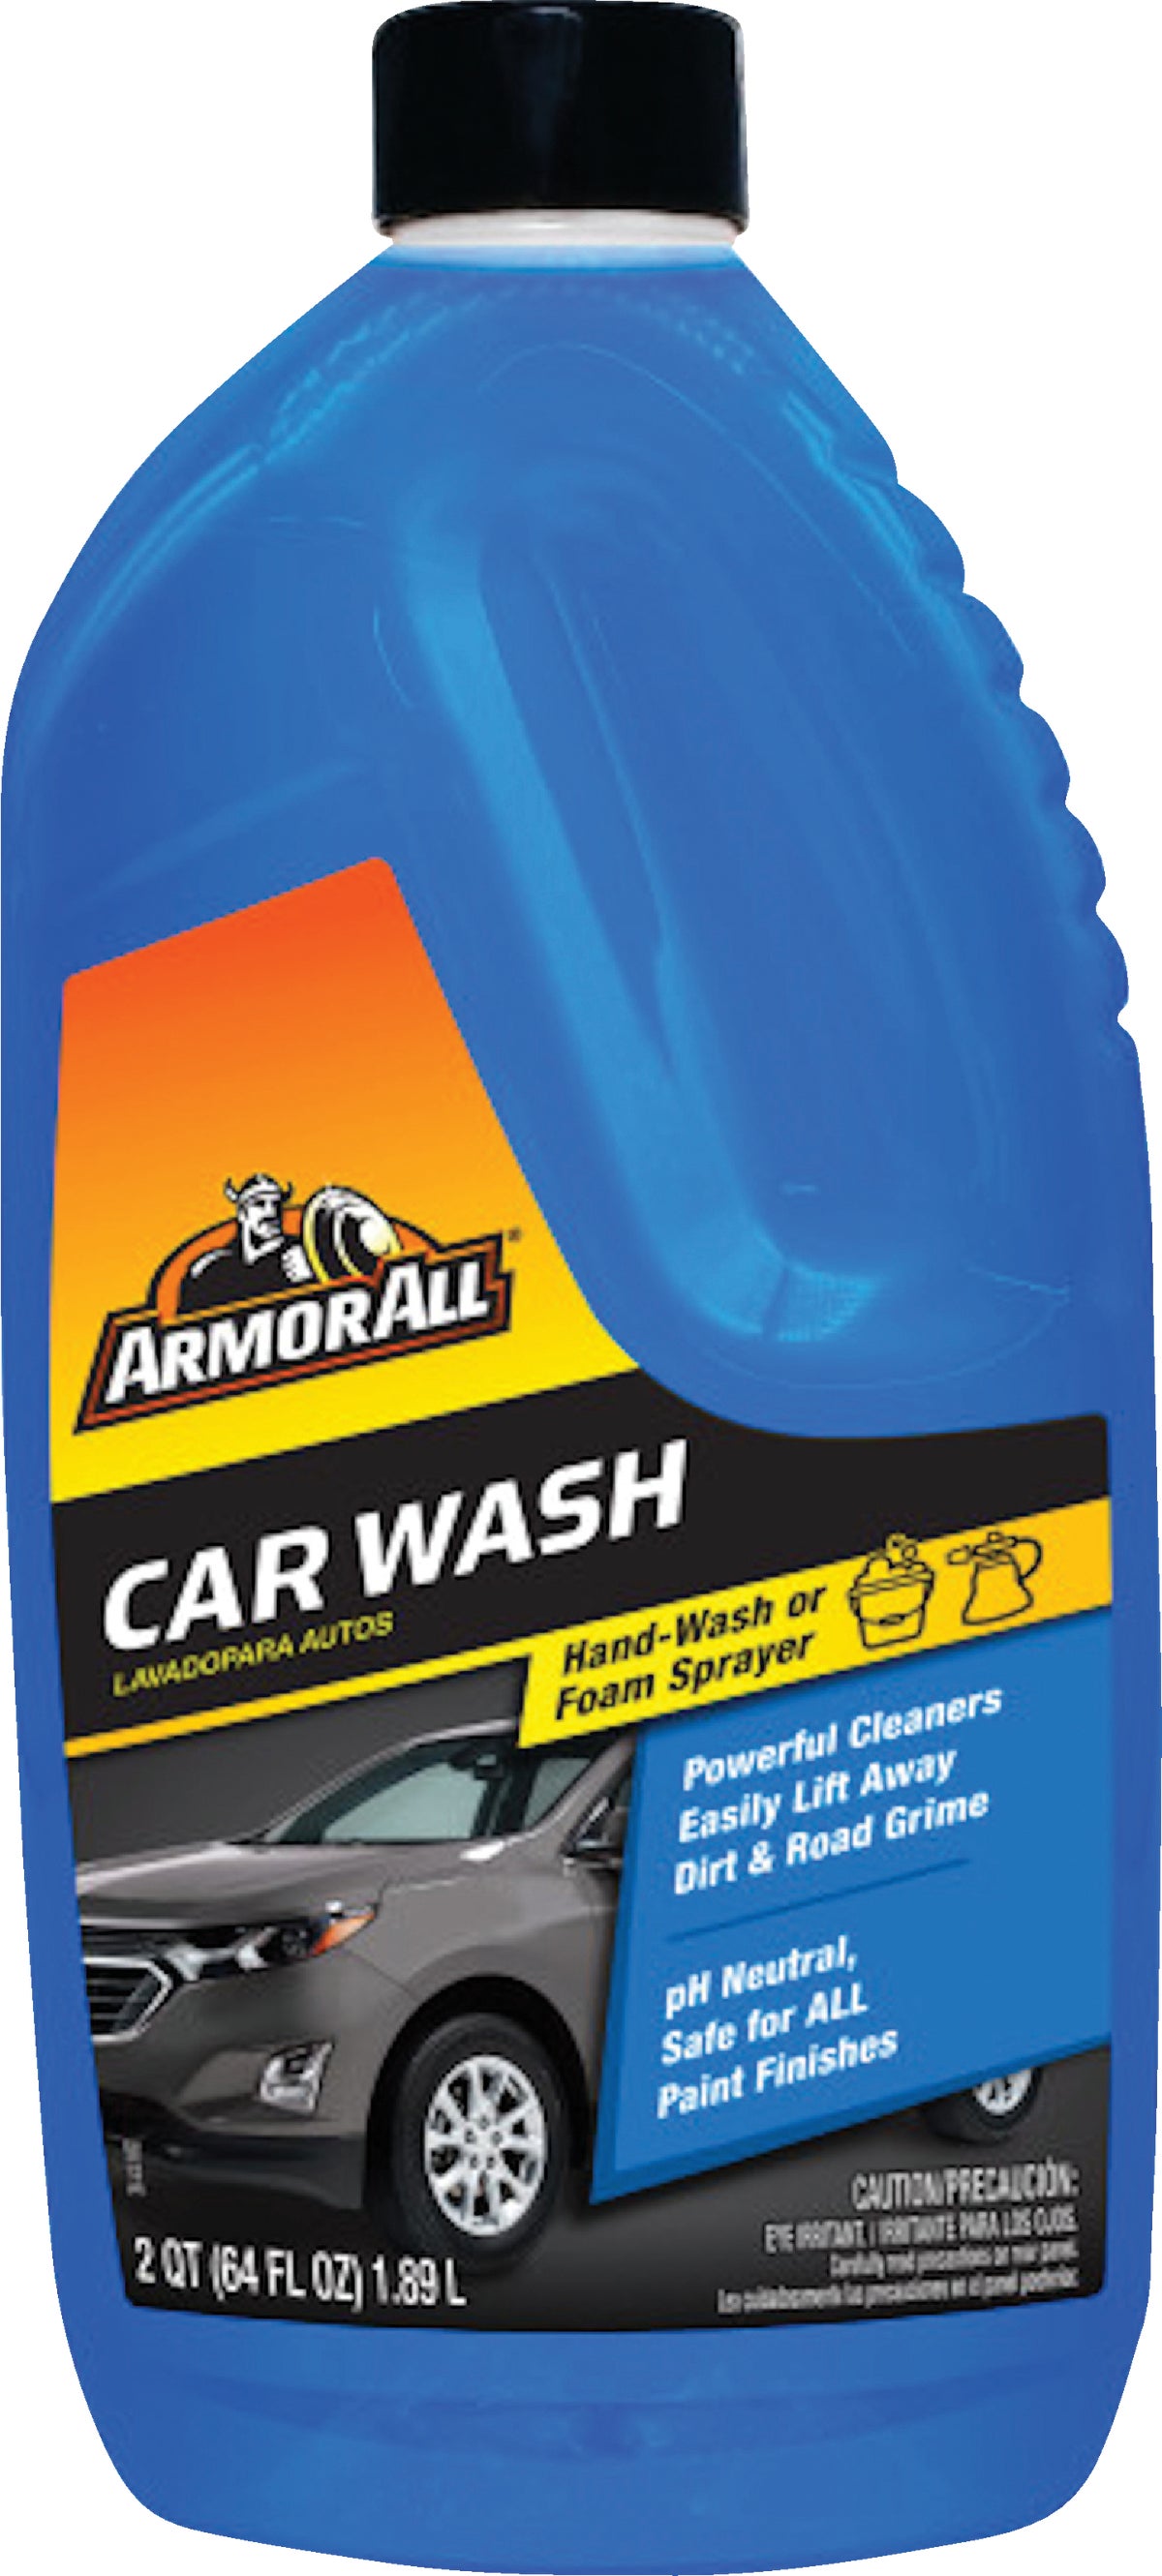 Snow Foam Car Wash: Intense Foam Actively Loosens Dirt For Safe, Effective  Cleaning, 50 OZ